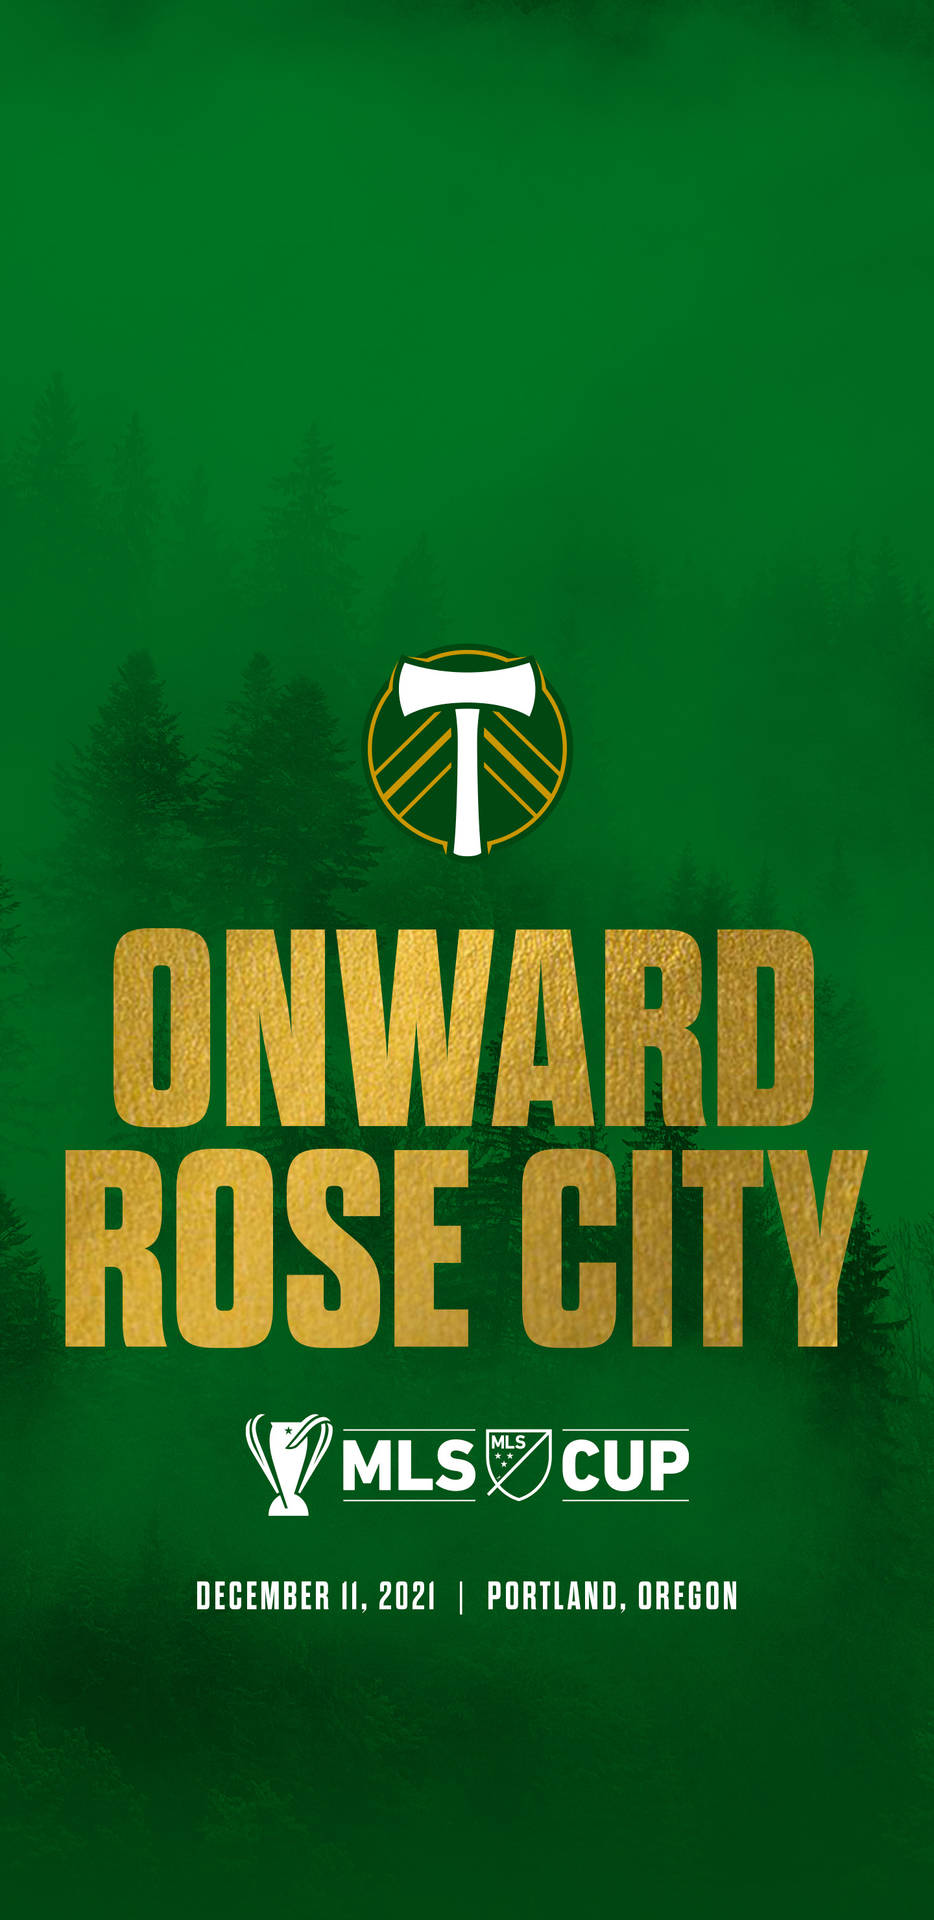 Graphic Design Portland Timbers Game Teaser Wallpaper